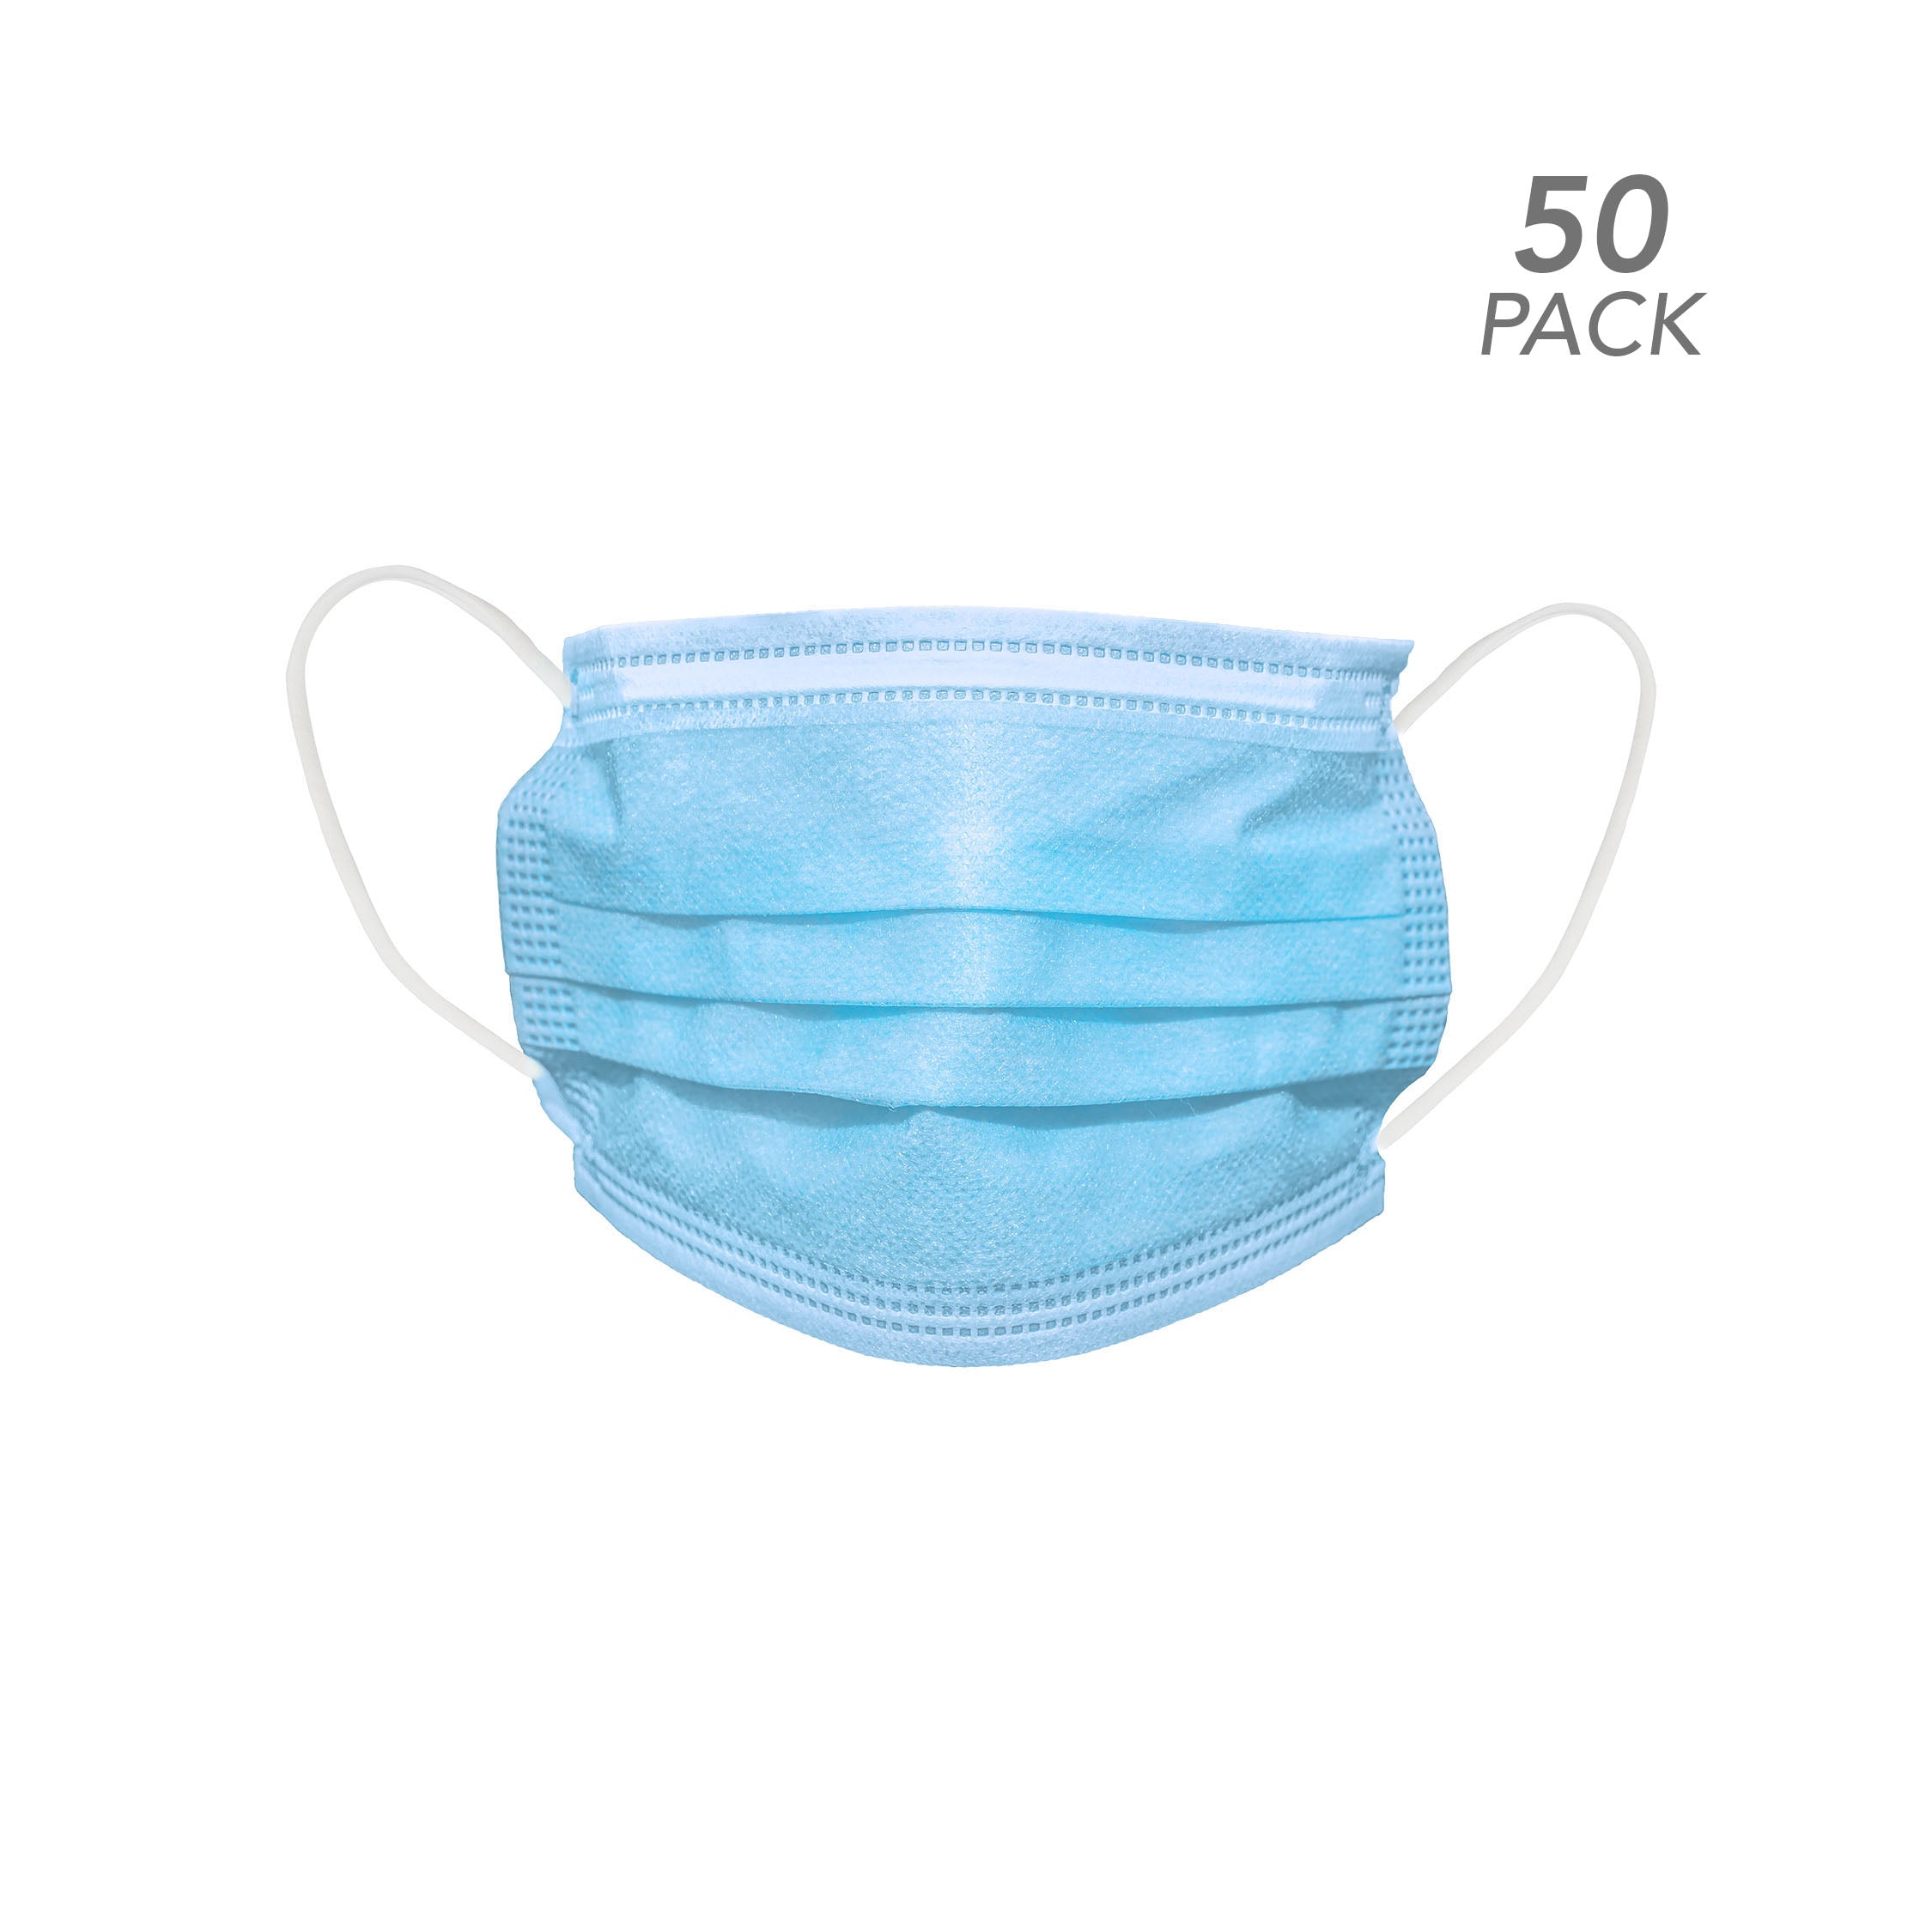 50 Pack - Disposable Protective Mask - 3 Ply